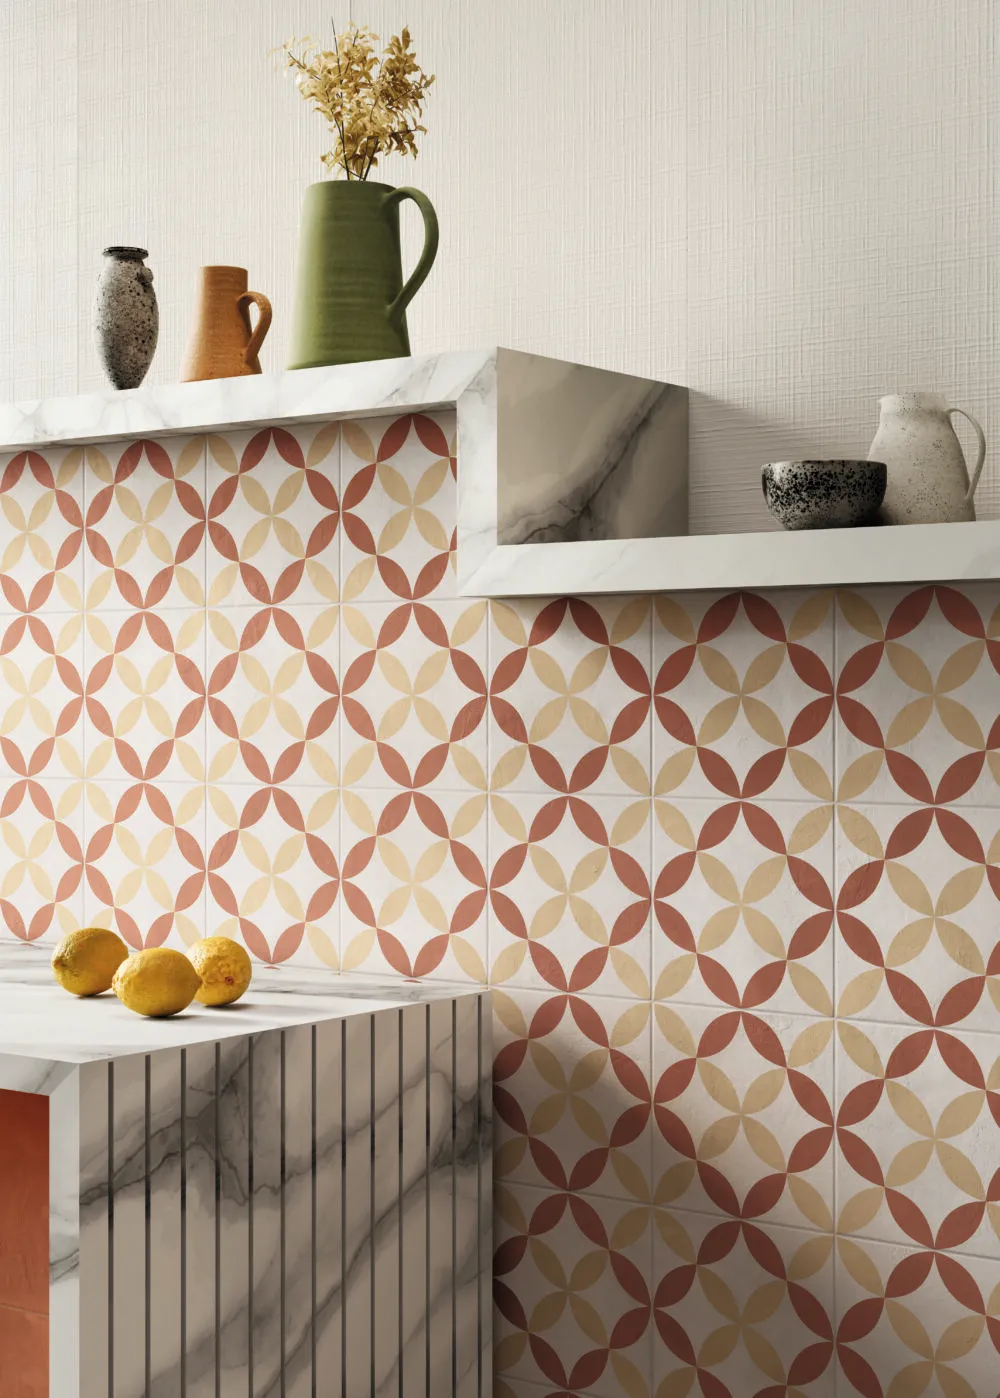 Patterned tiles on a kitchen wall